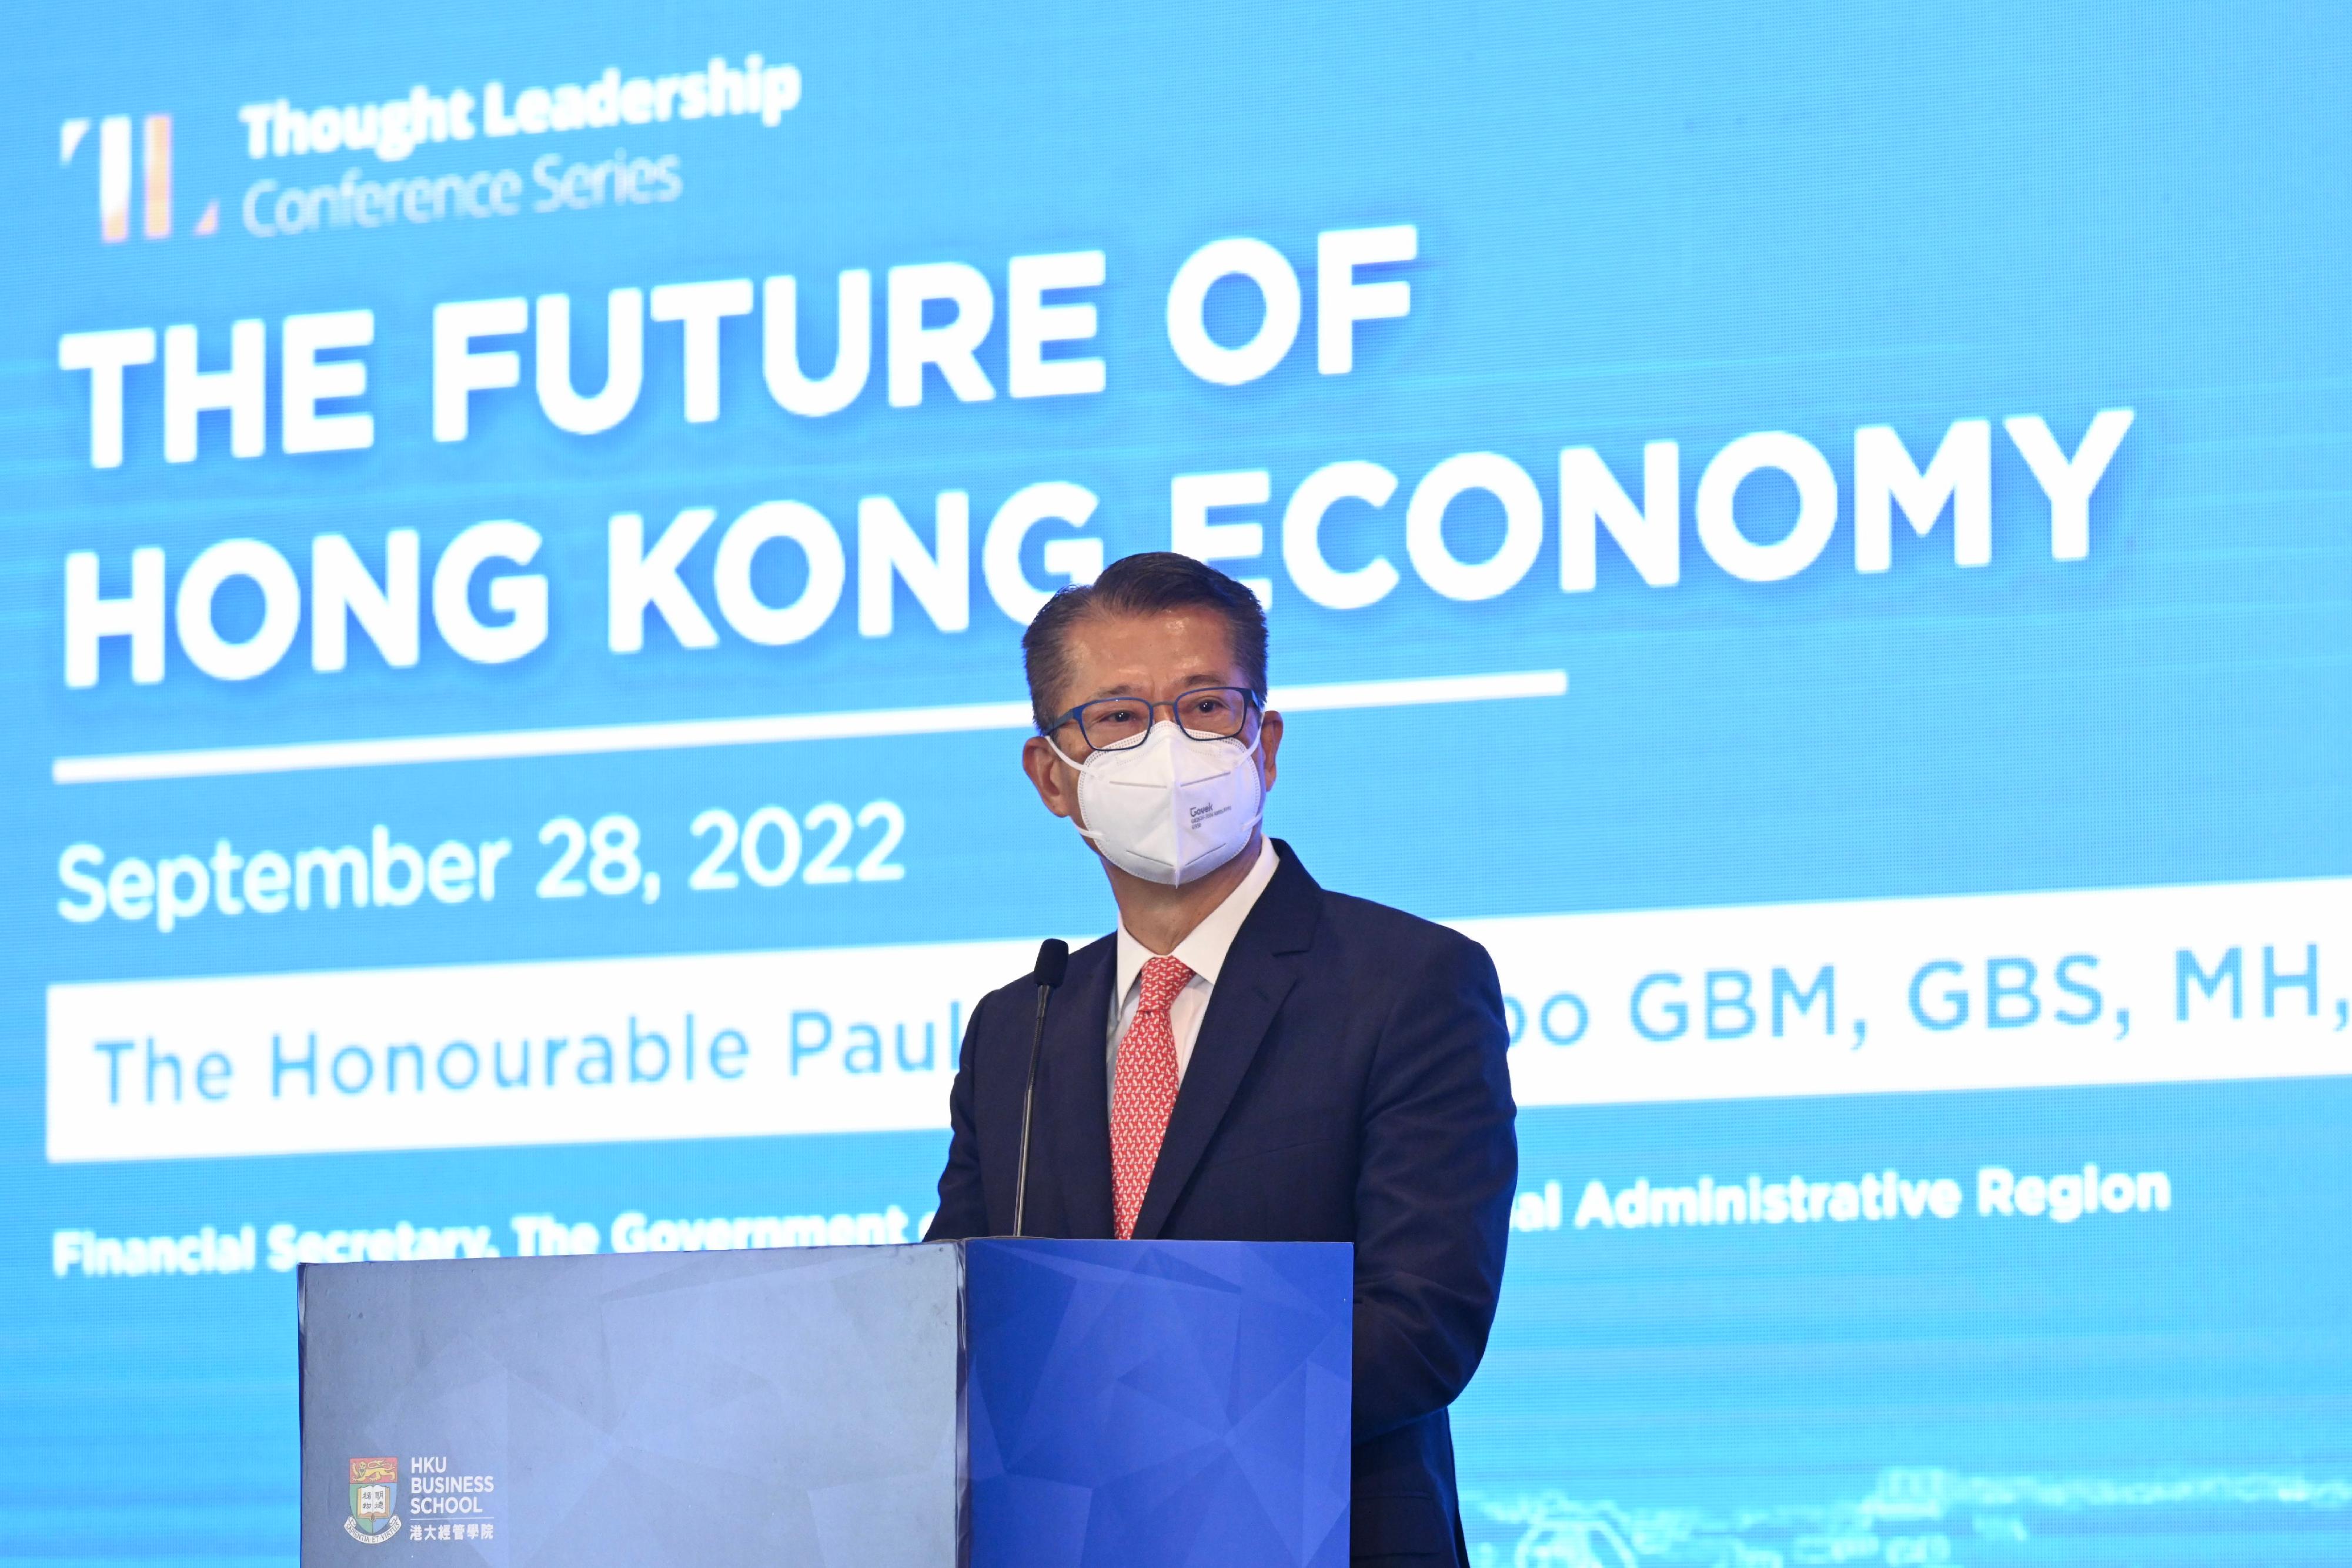 The Financial Secretary, Mr Paul Chan, speaks at the conference on "The Future of Hong Kong Economy" organised by the University of Hong Kong Business School today (September 28).